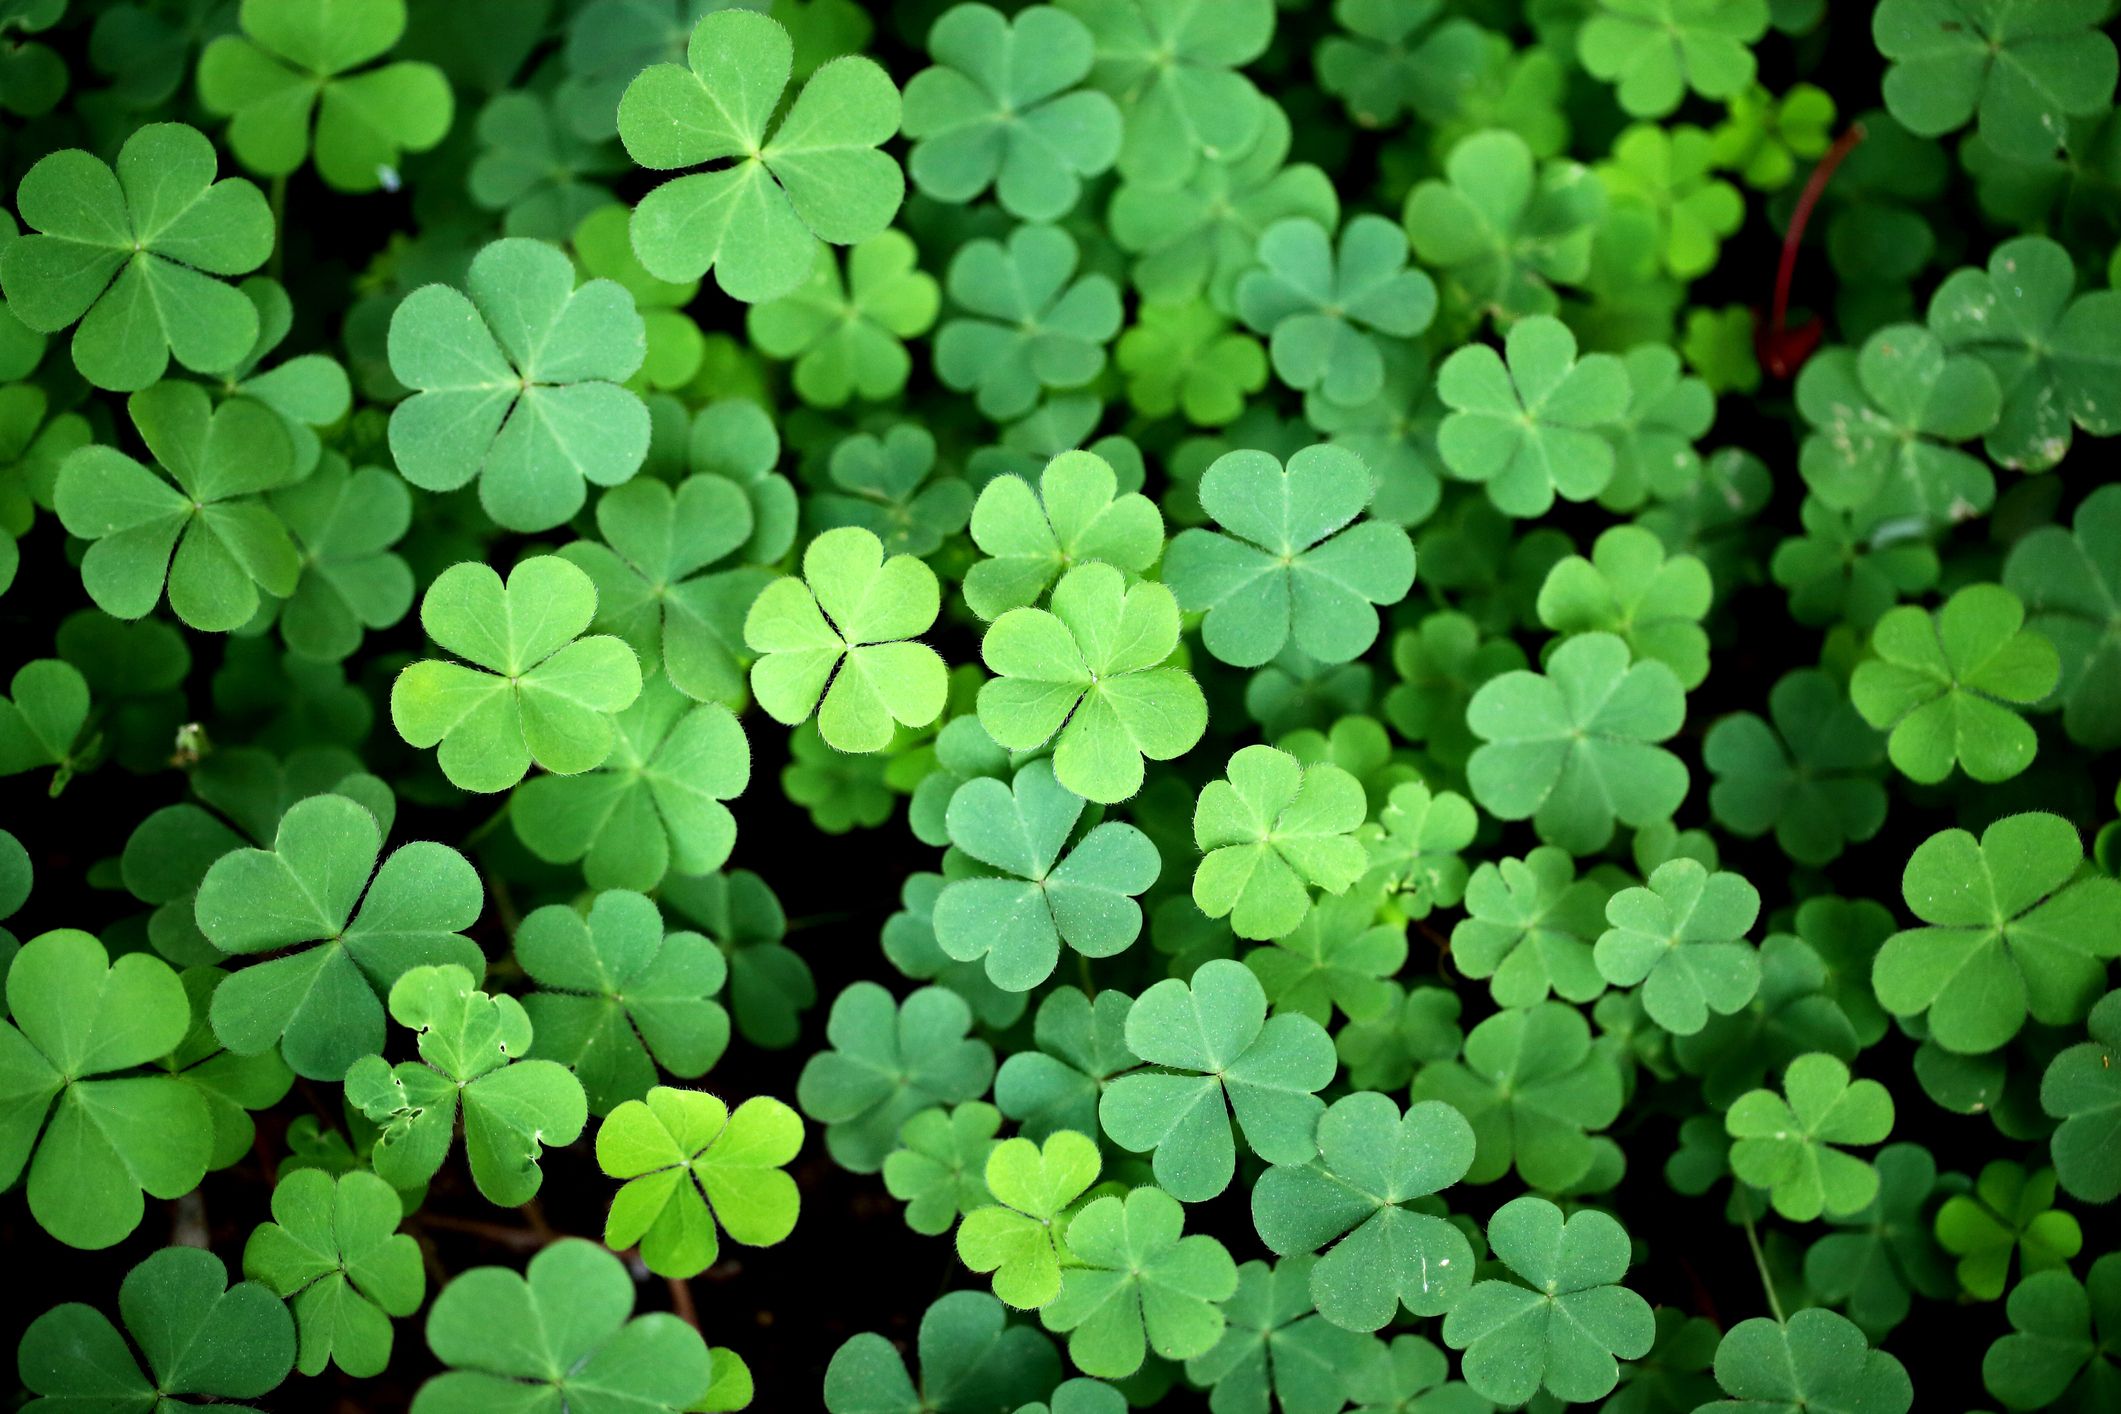 Image of Clover